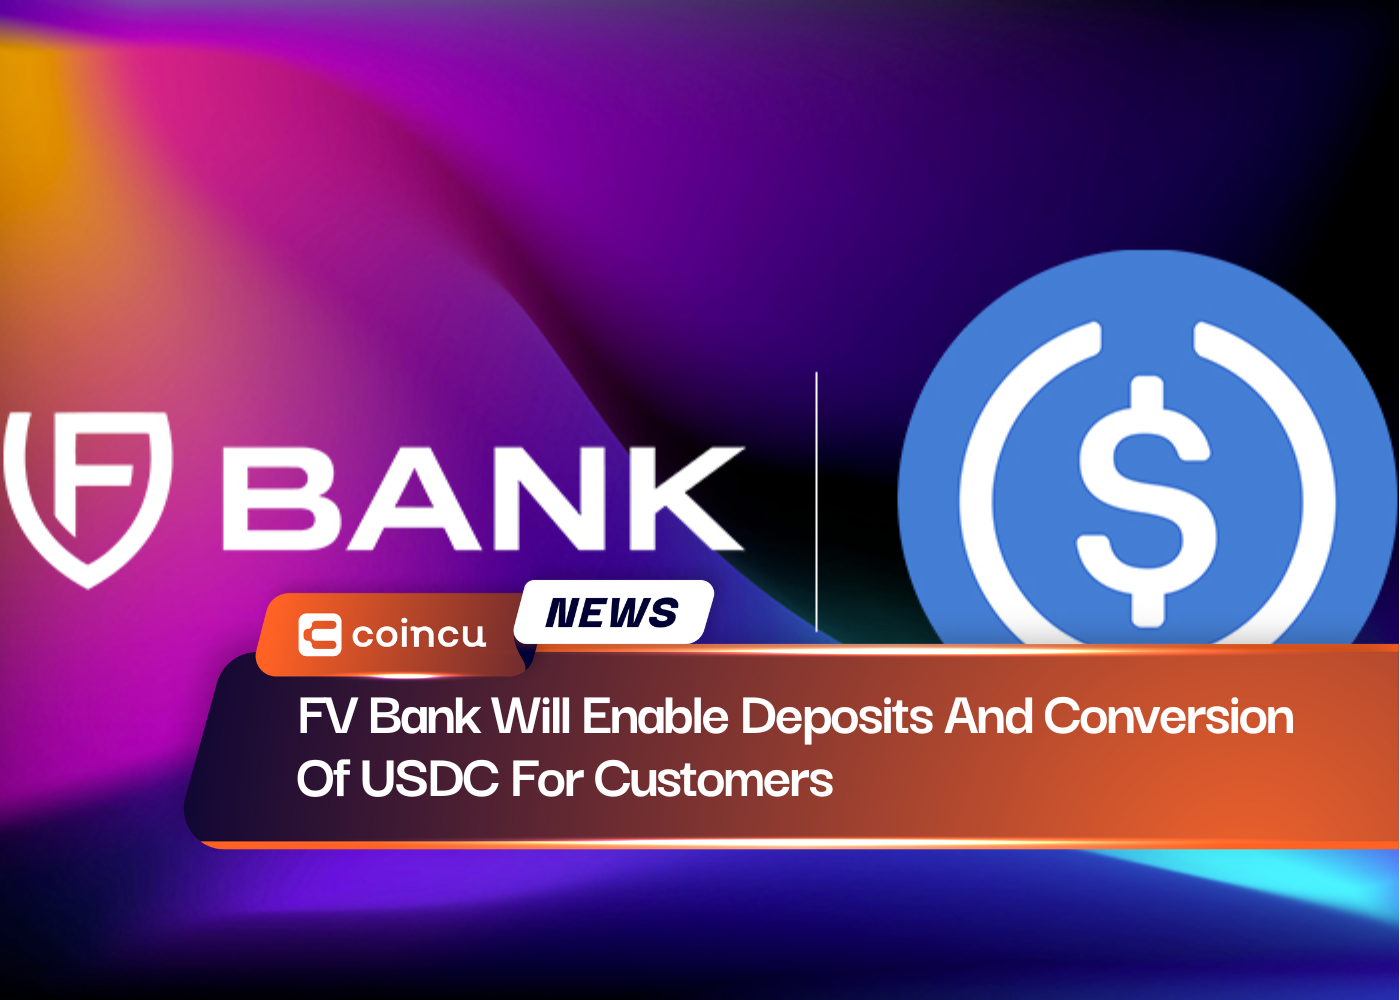 FV Bank Will Enable Deposits And Conversion Of USDC For Customers